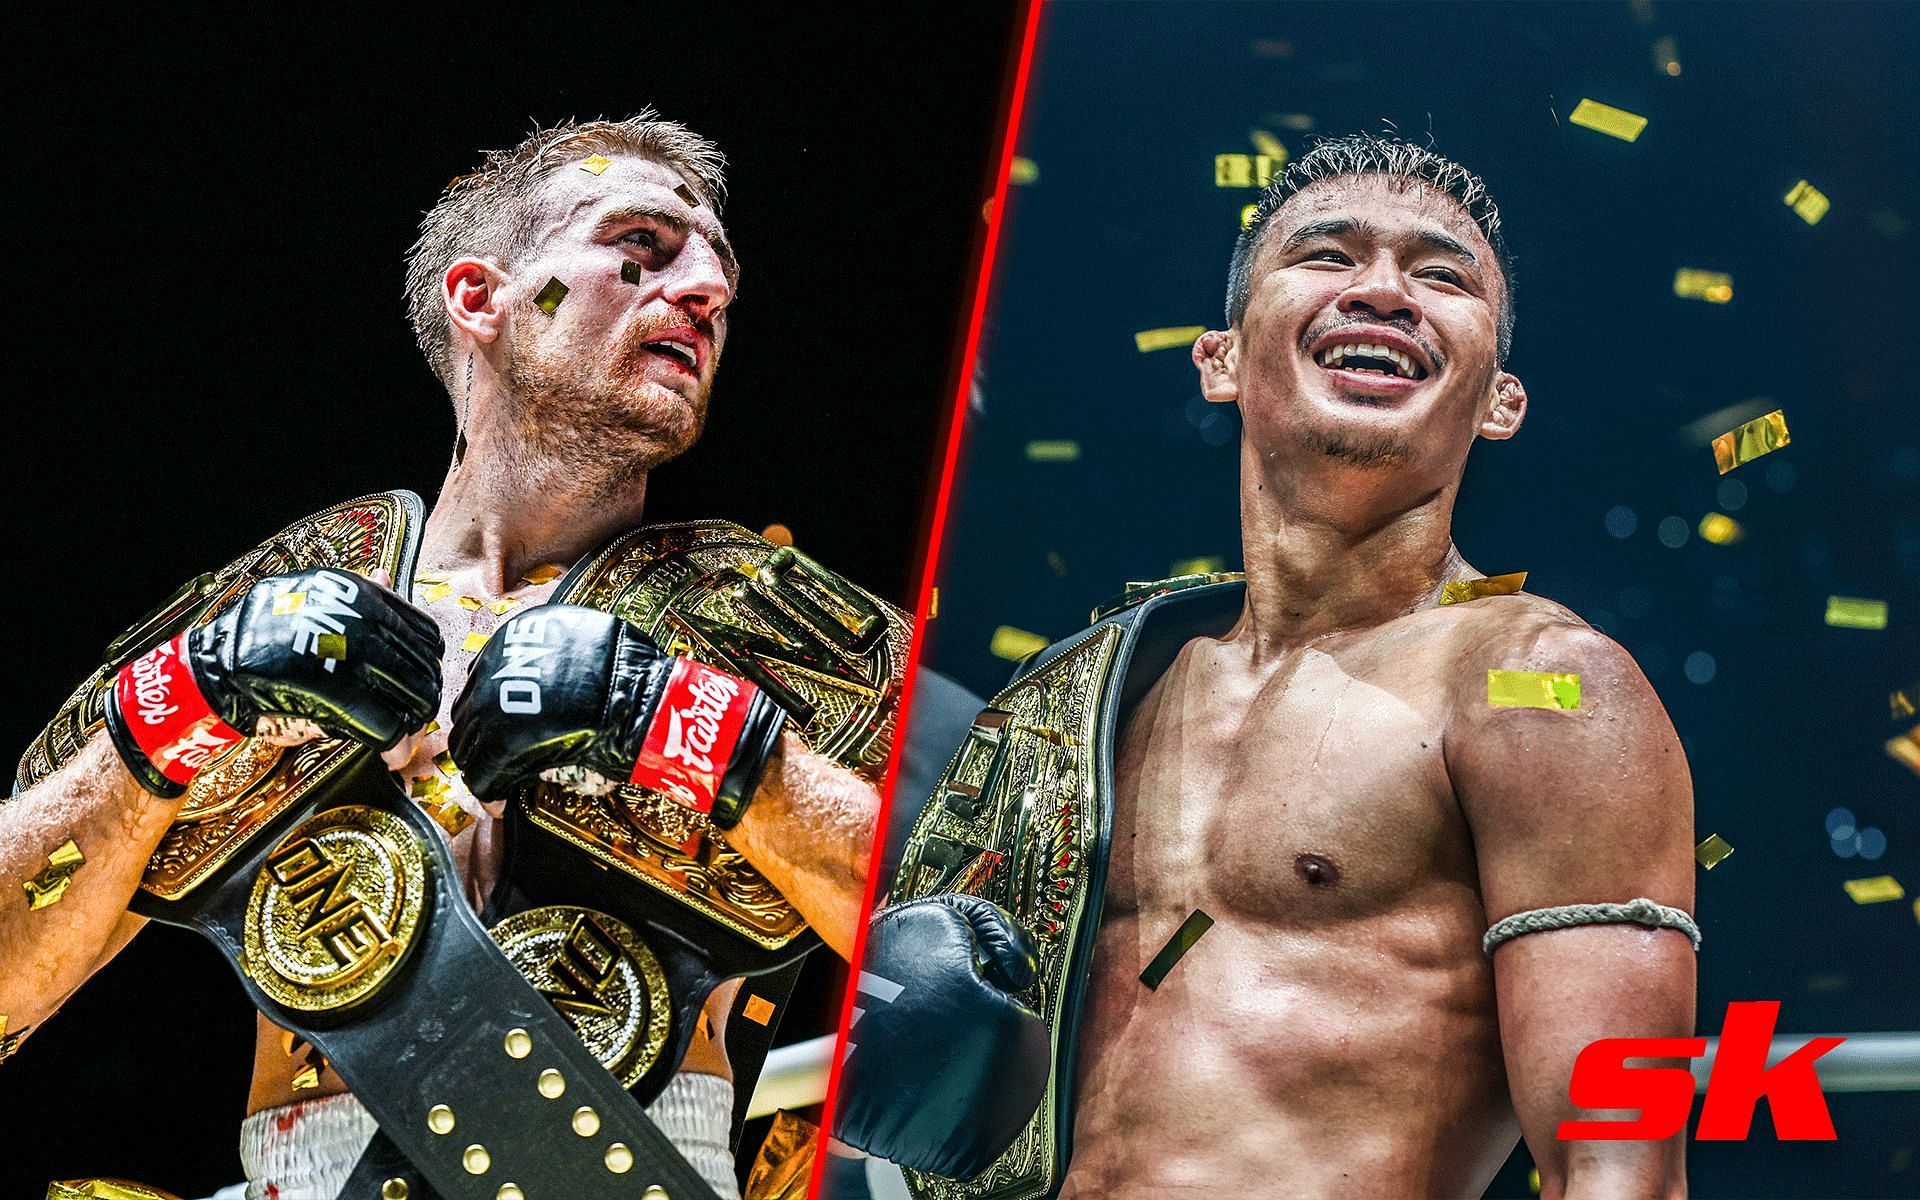 Jonathan Haggerty and Superlek are on a collision course in ONE Championship